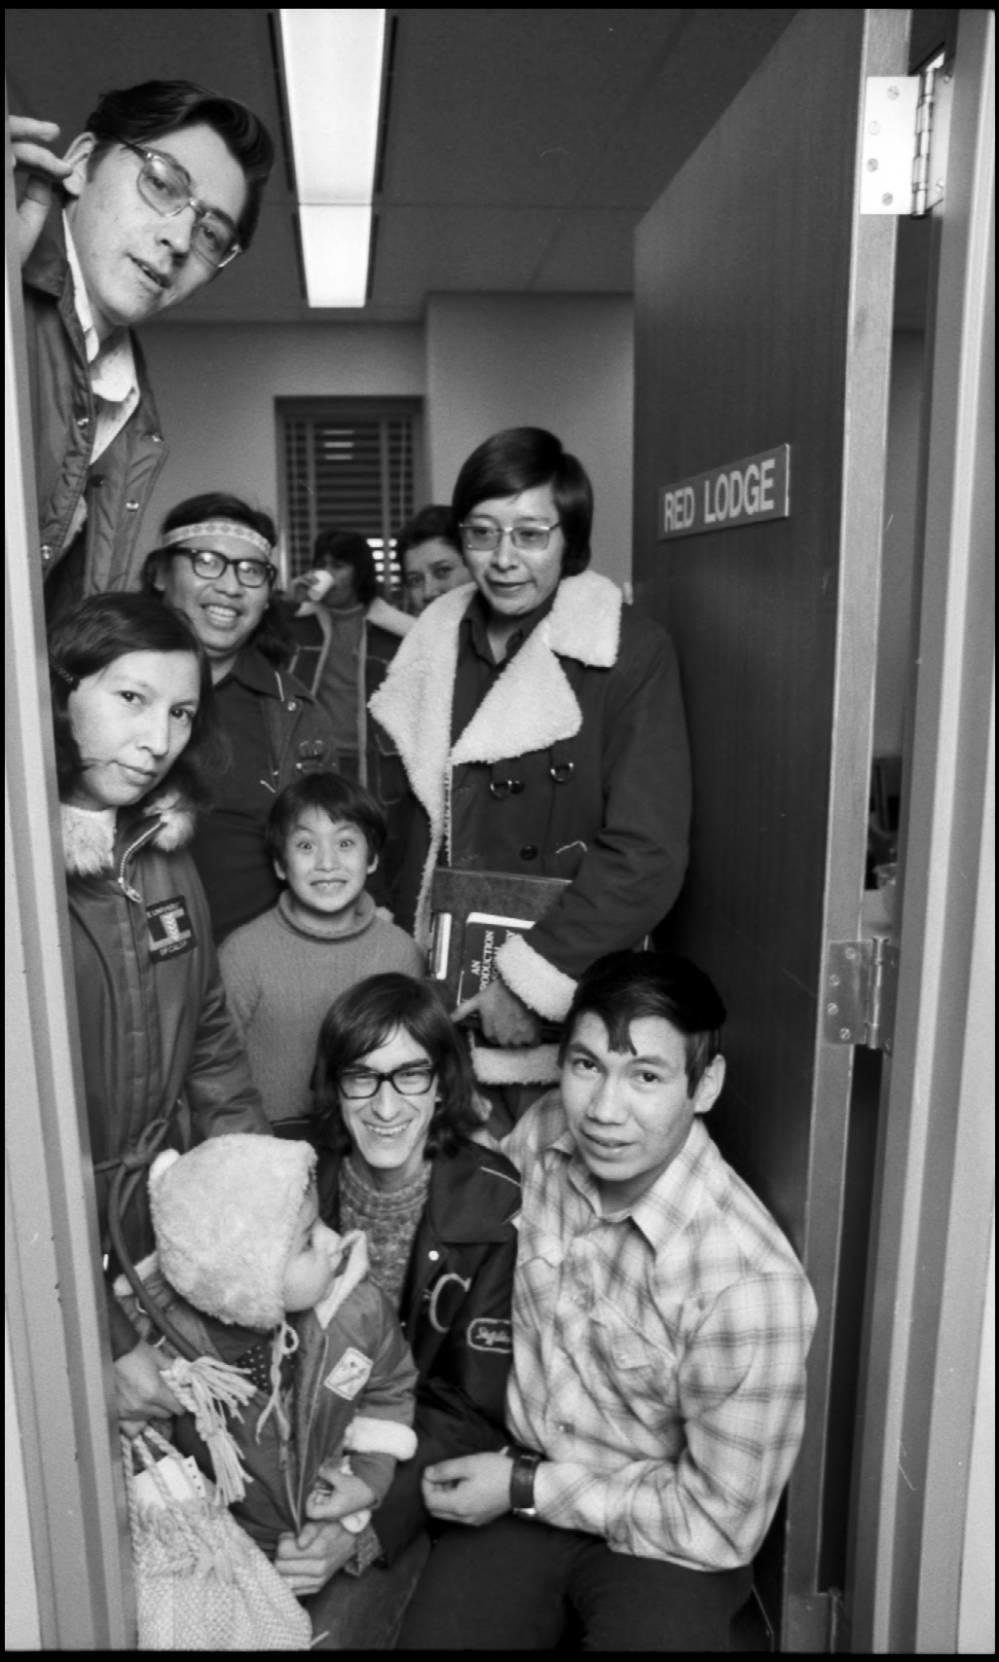 Aboriginal students using the Red Lodge Indian Student Room in the Education building in December 1972